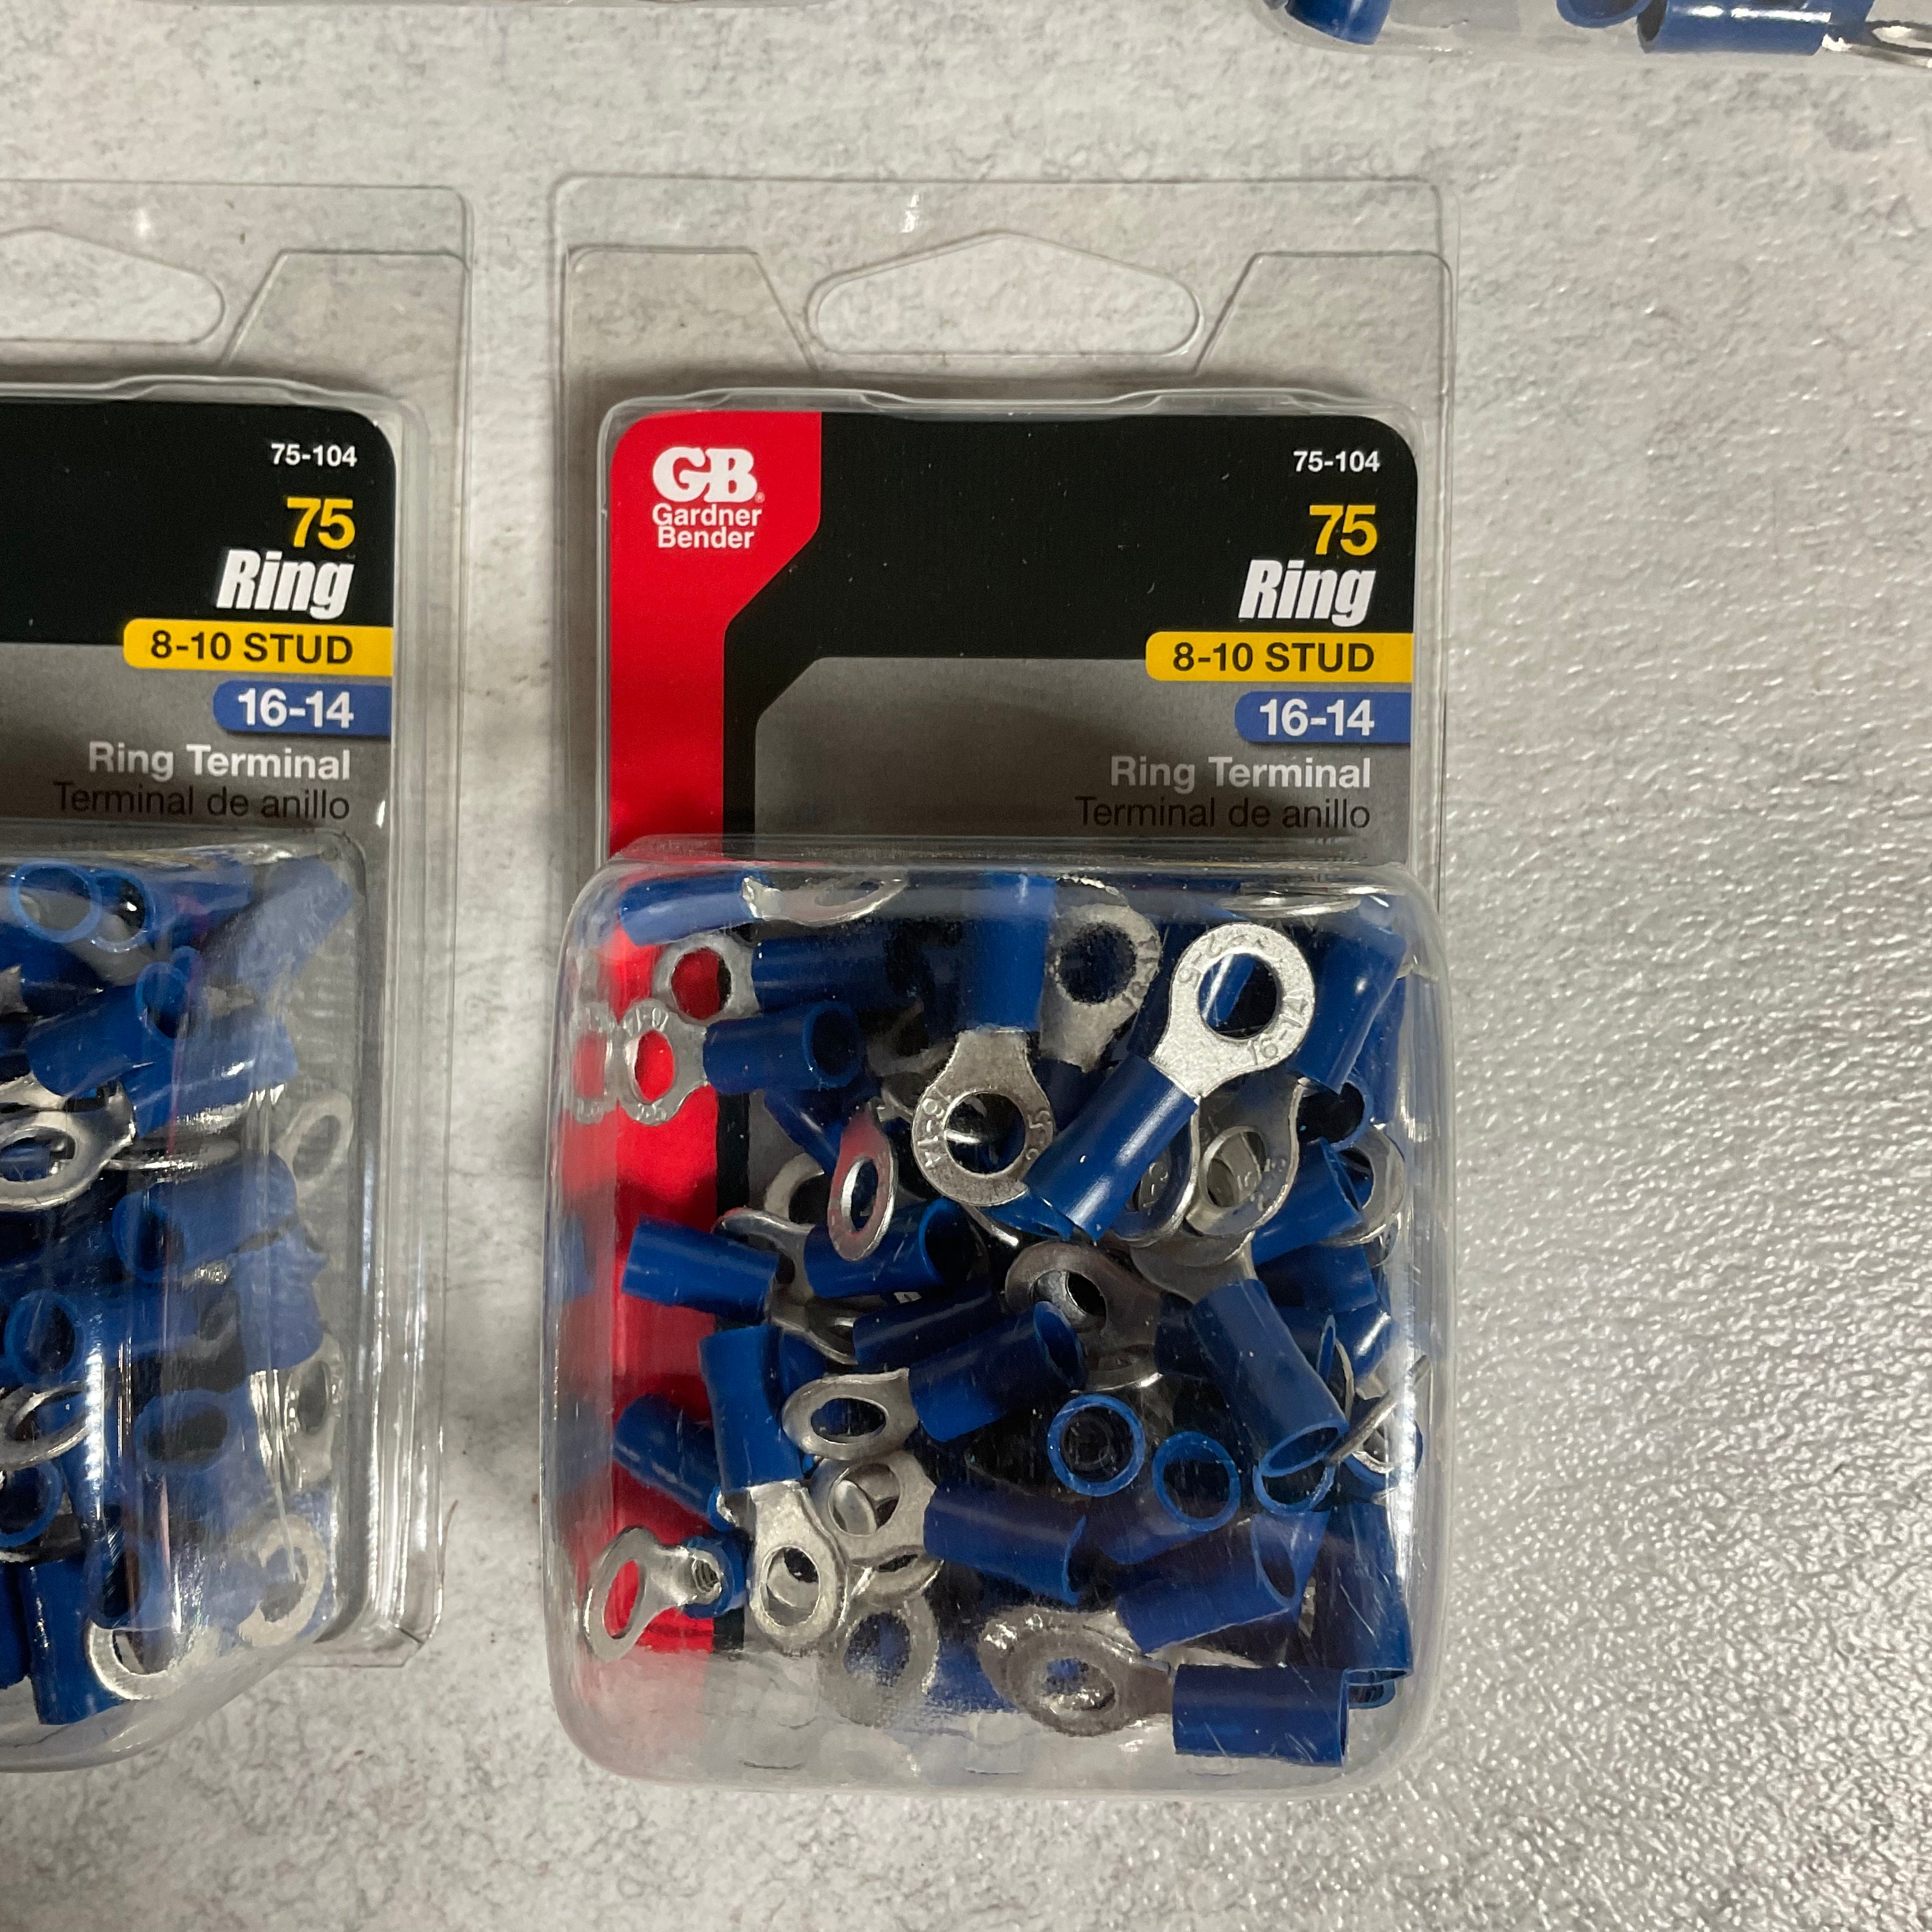 (Lot of 5) 75-104 Terminal Ring 16-14 AWG, 10-8 Stud Sz, Blue, 75 Pack, 5 Piece (7451485274350)